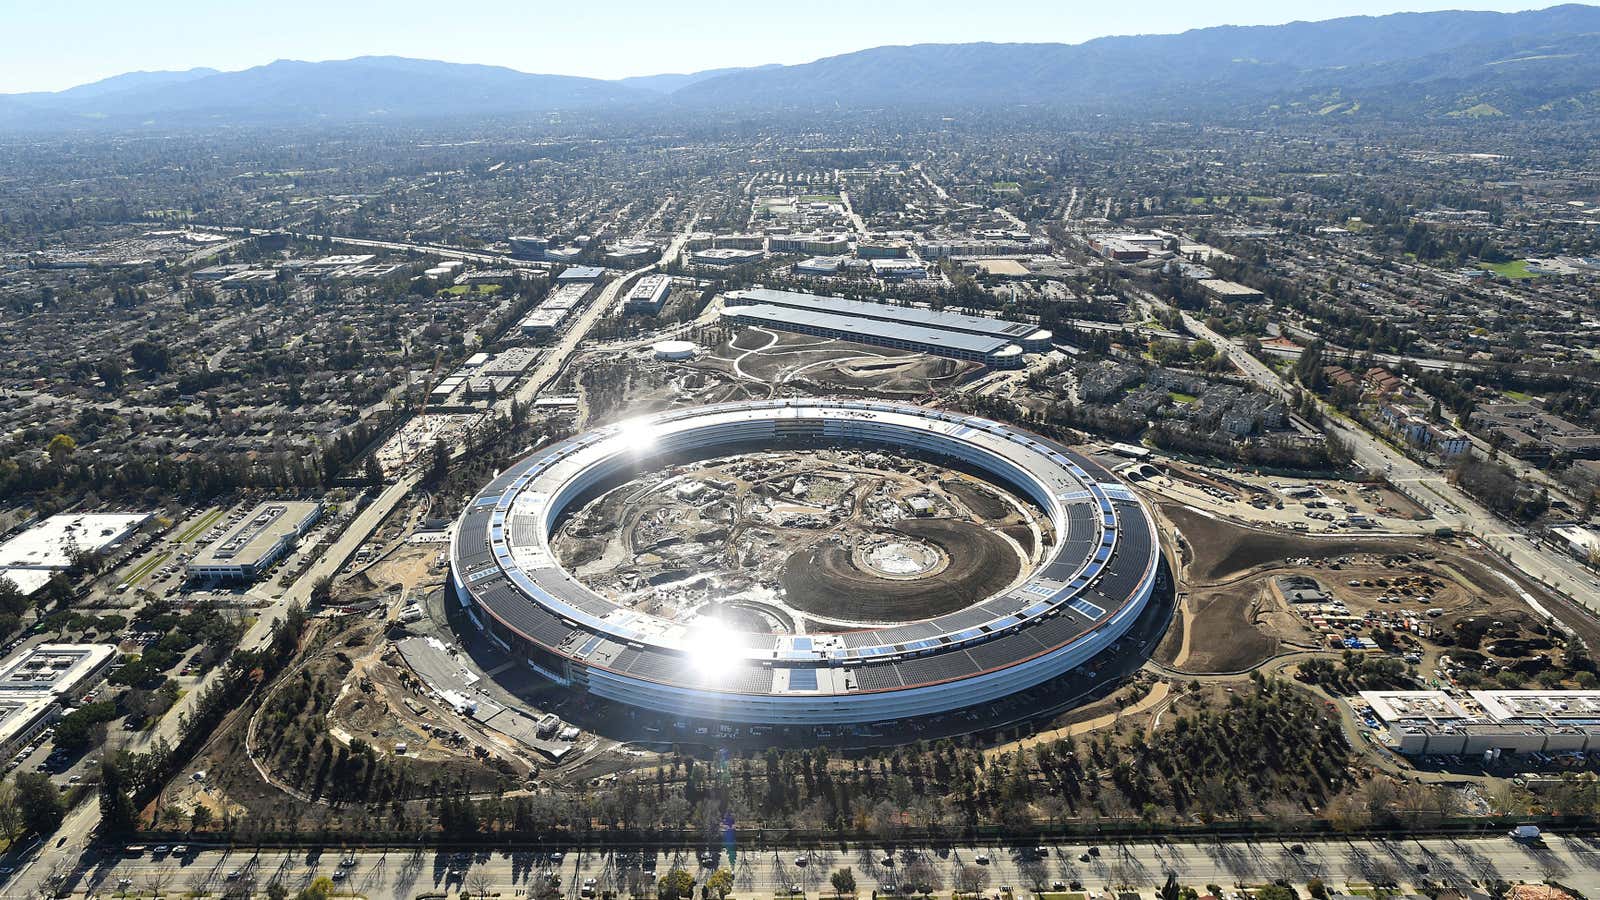 Apple’s new campus, with a few trees planted.